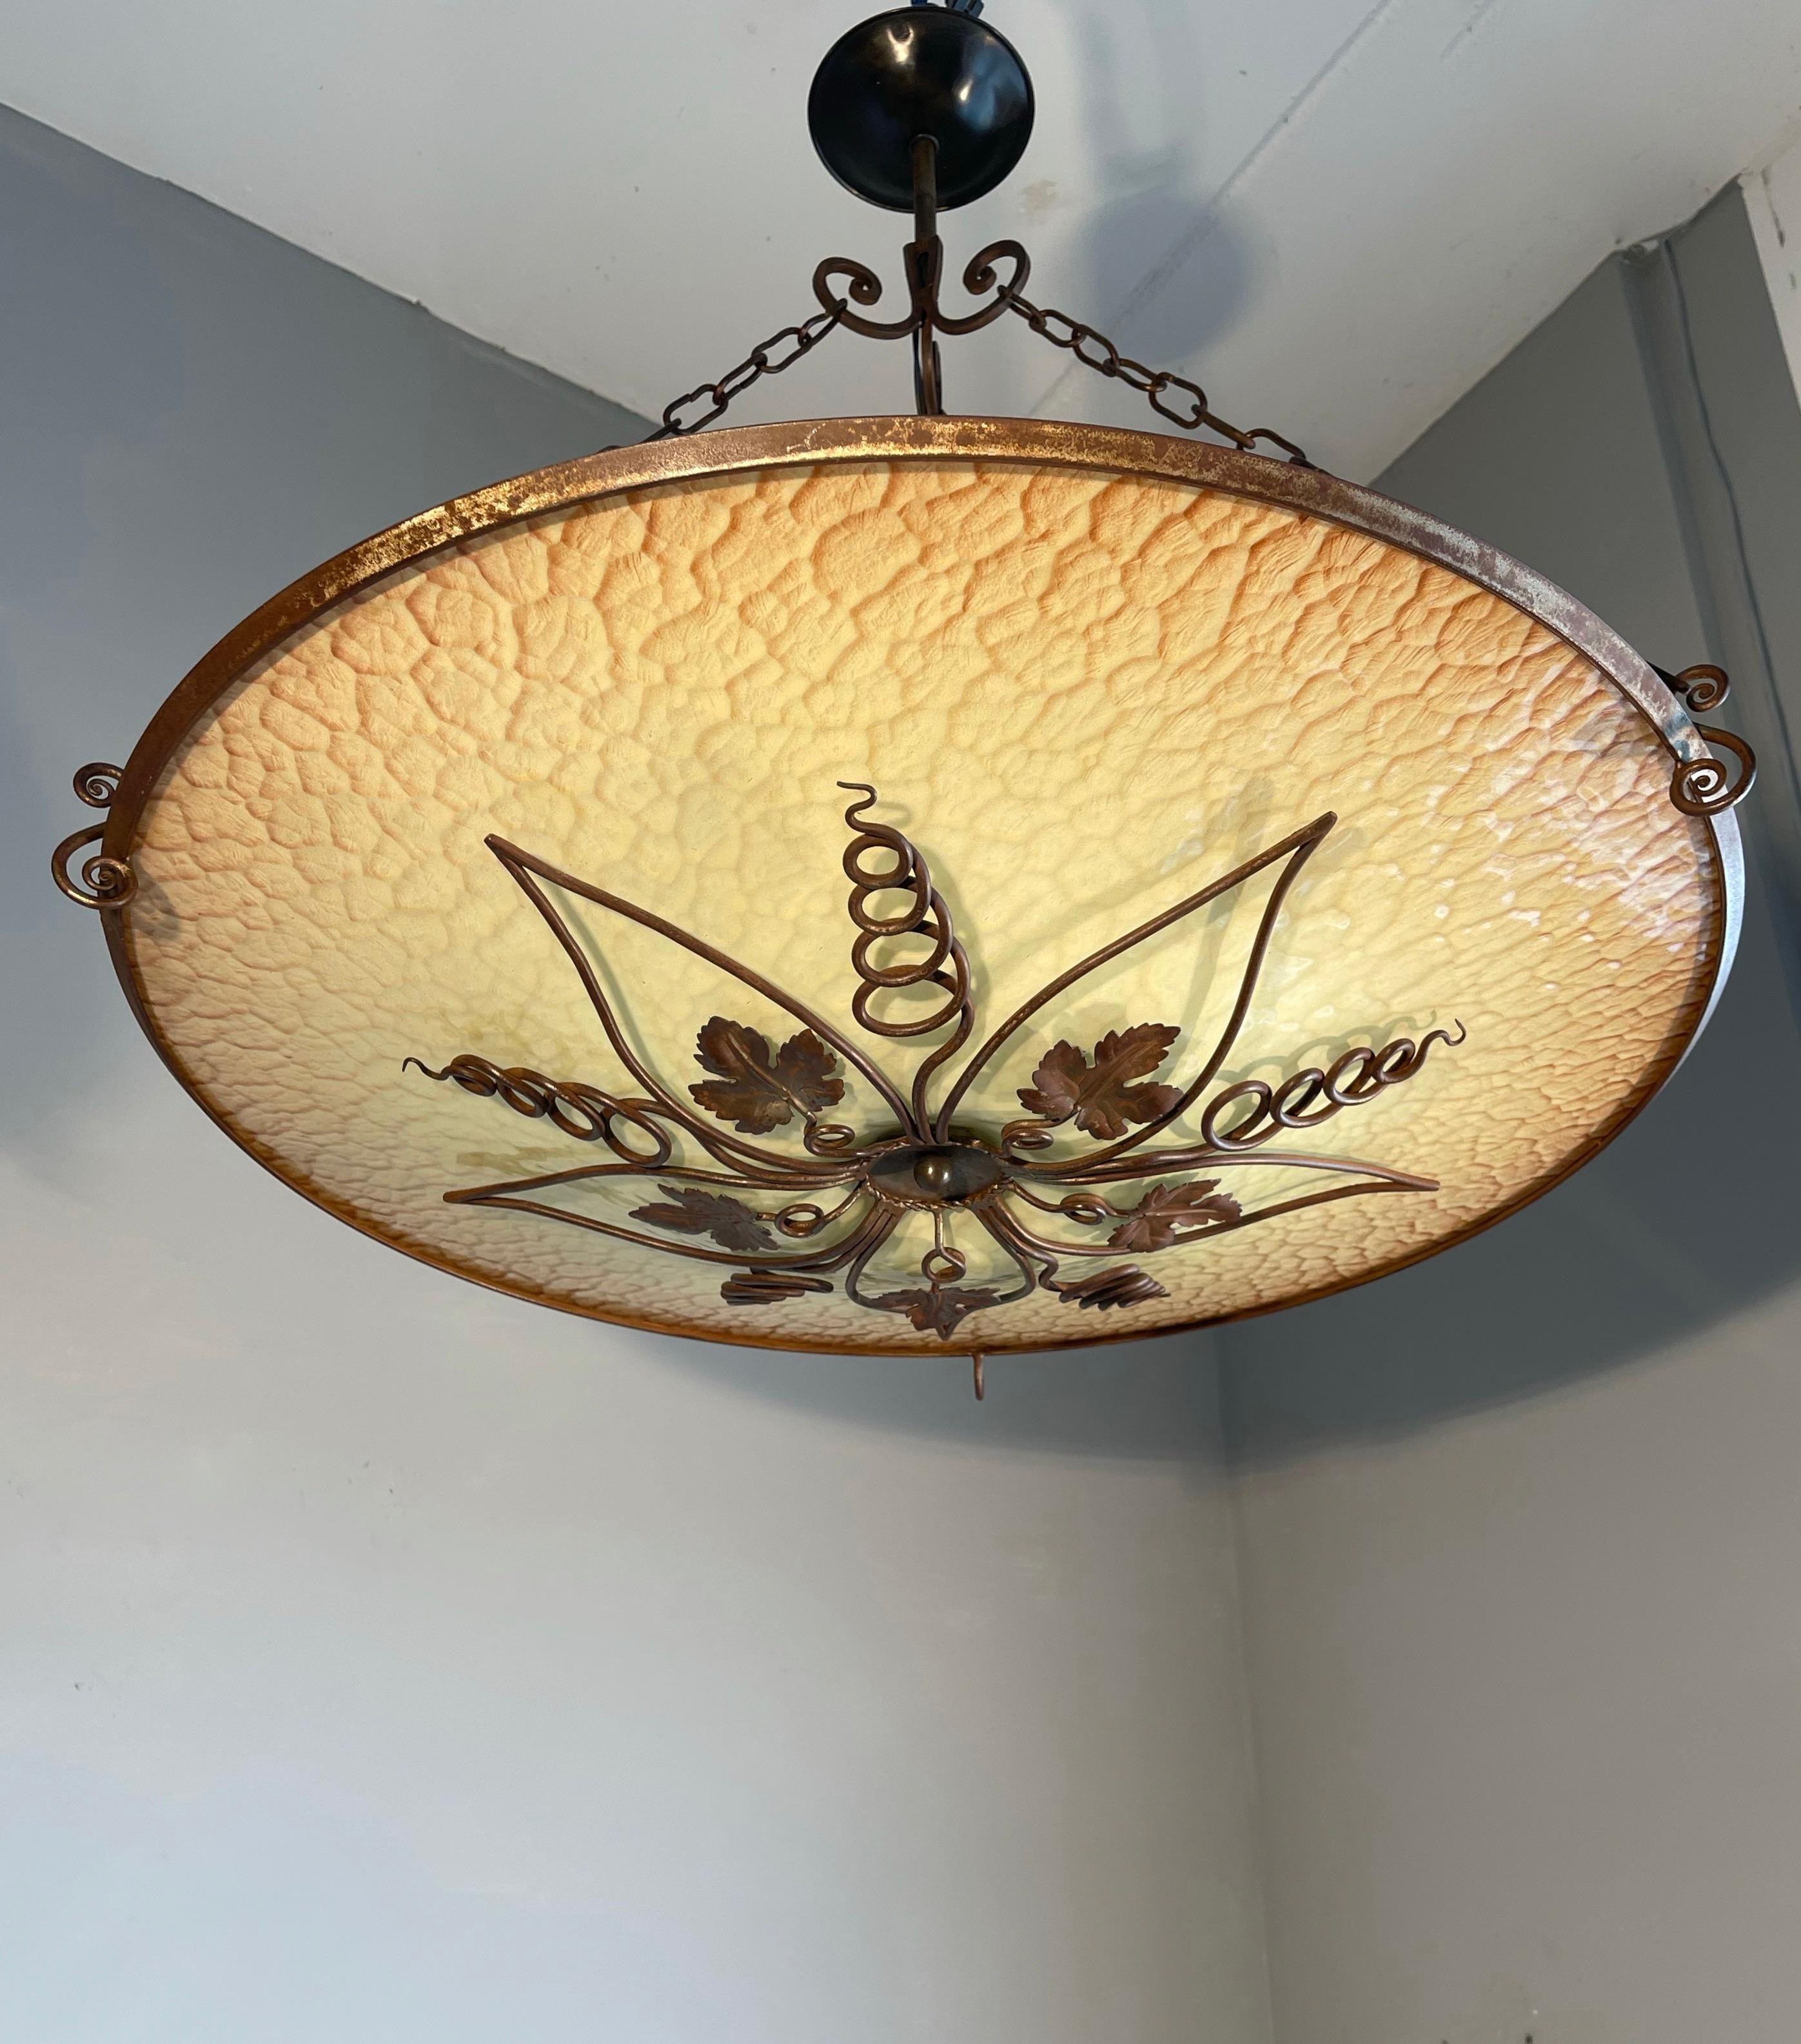 Excellent condition, Art Deco era, 3-light, wine theme pendant light.

If you are looking for a beautiful light fixture to decorate your room of interior then this handcrafted light fixture from the Dutch Art Deco era could be perfect for you. The